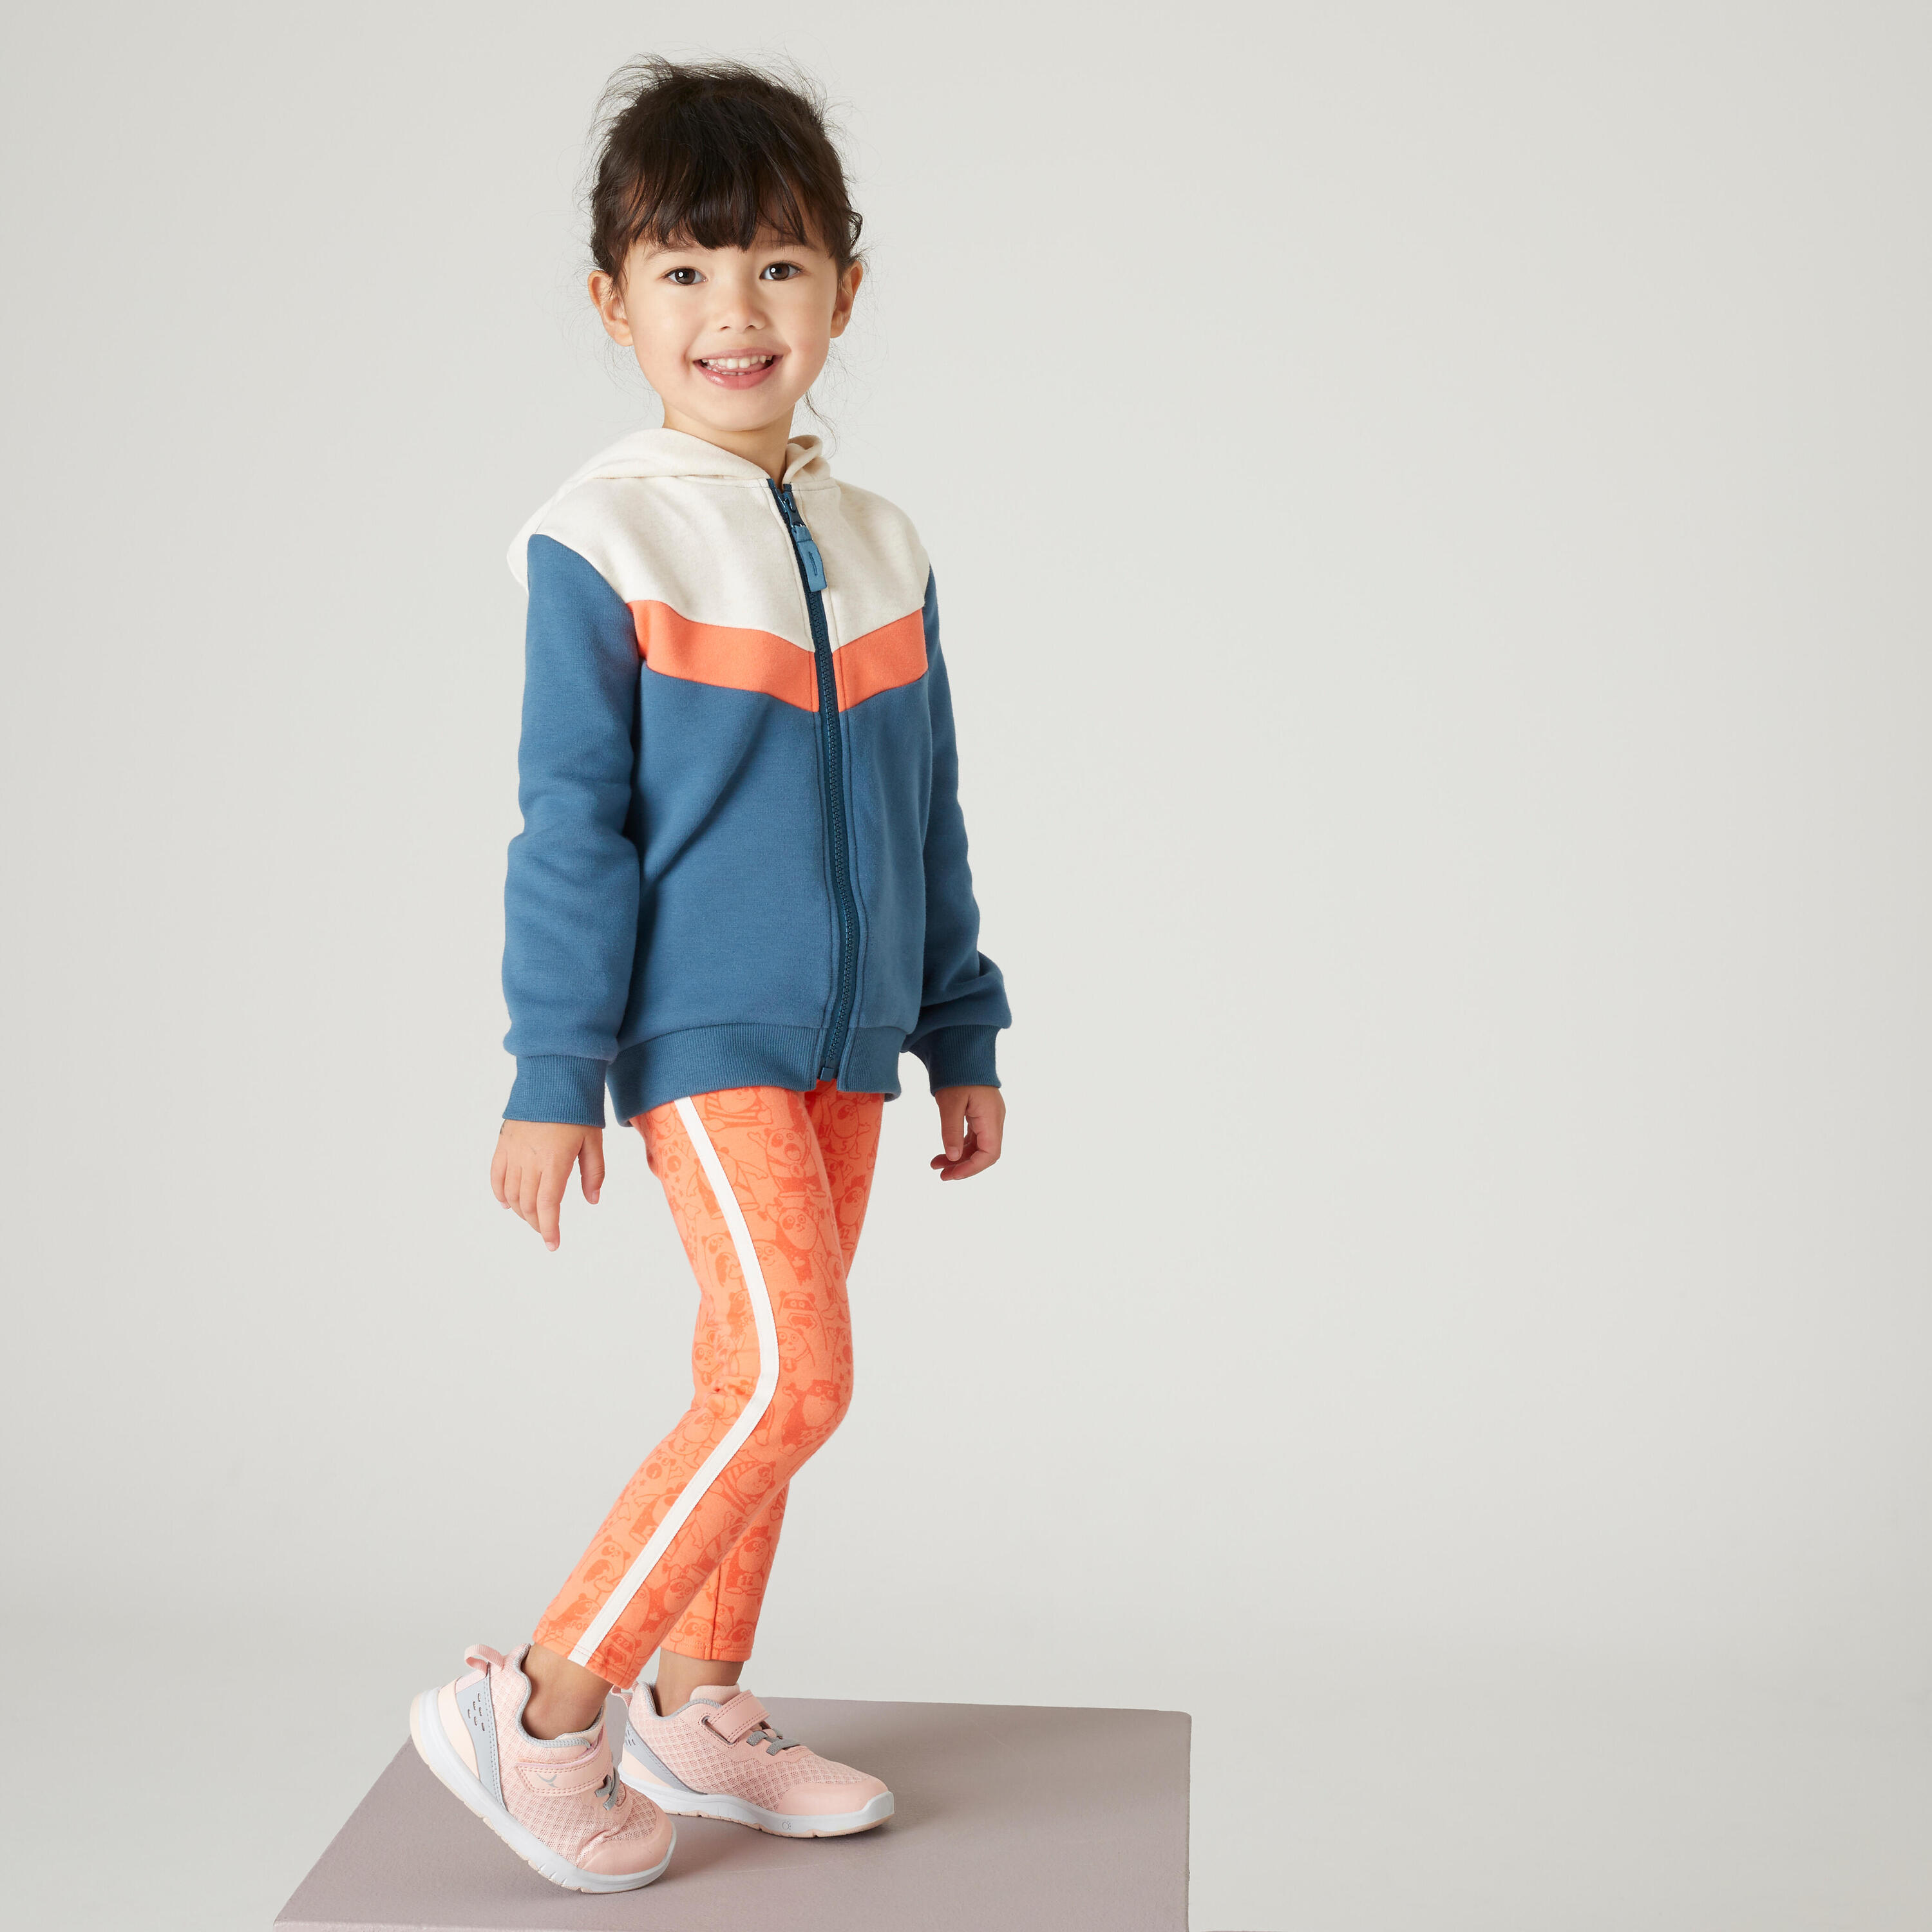 Kids' Warm Leggings 120 - Coral with Patterns 2/6